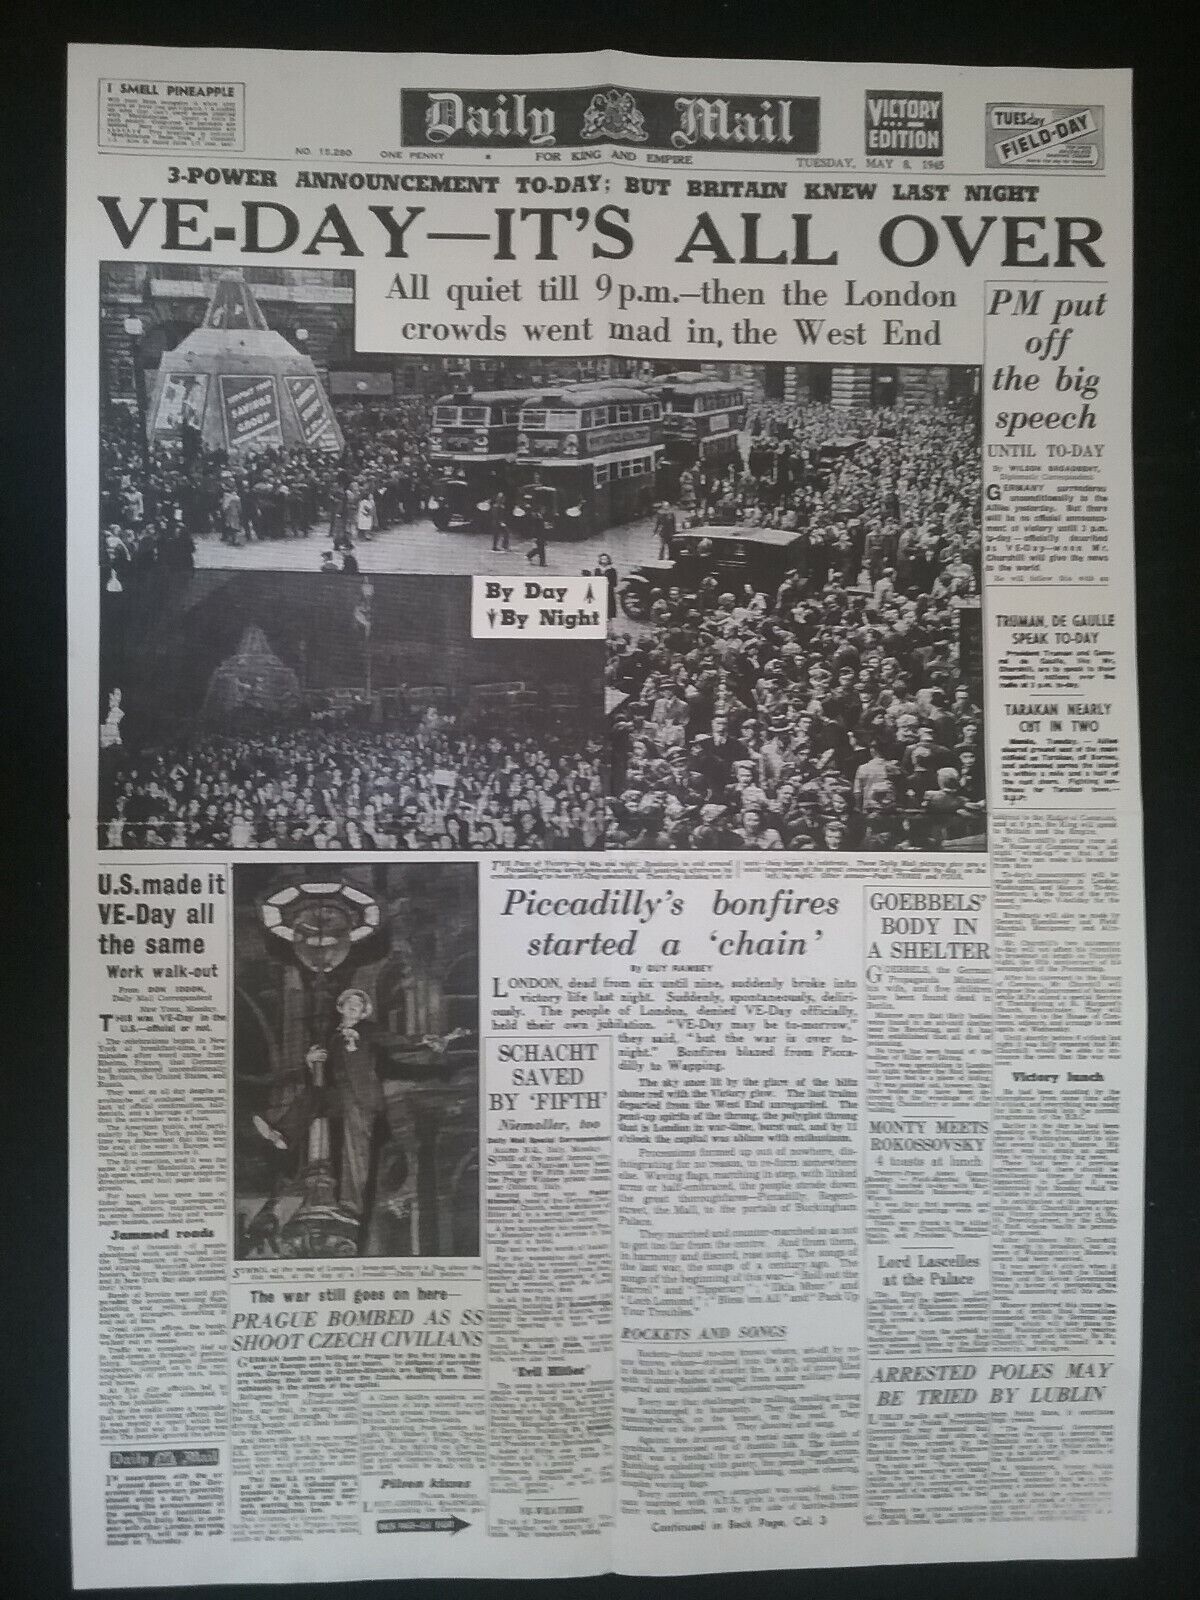 FRONT PAGE POSTER OF THE DAILY MAIL FOR 8th MAY 1945 , VE-DAY - \